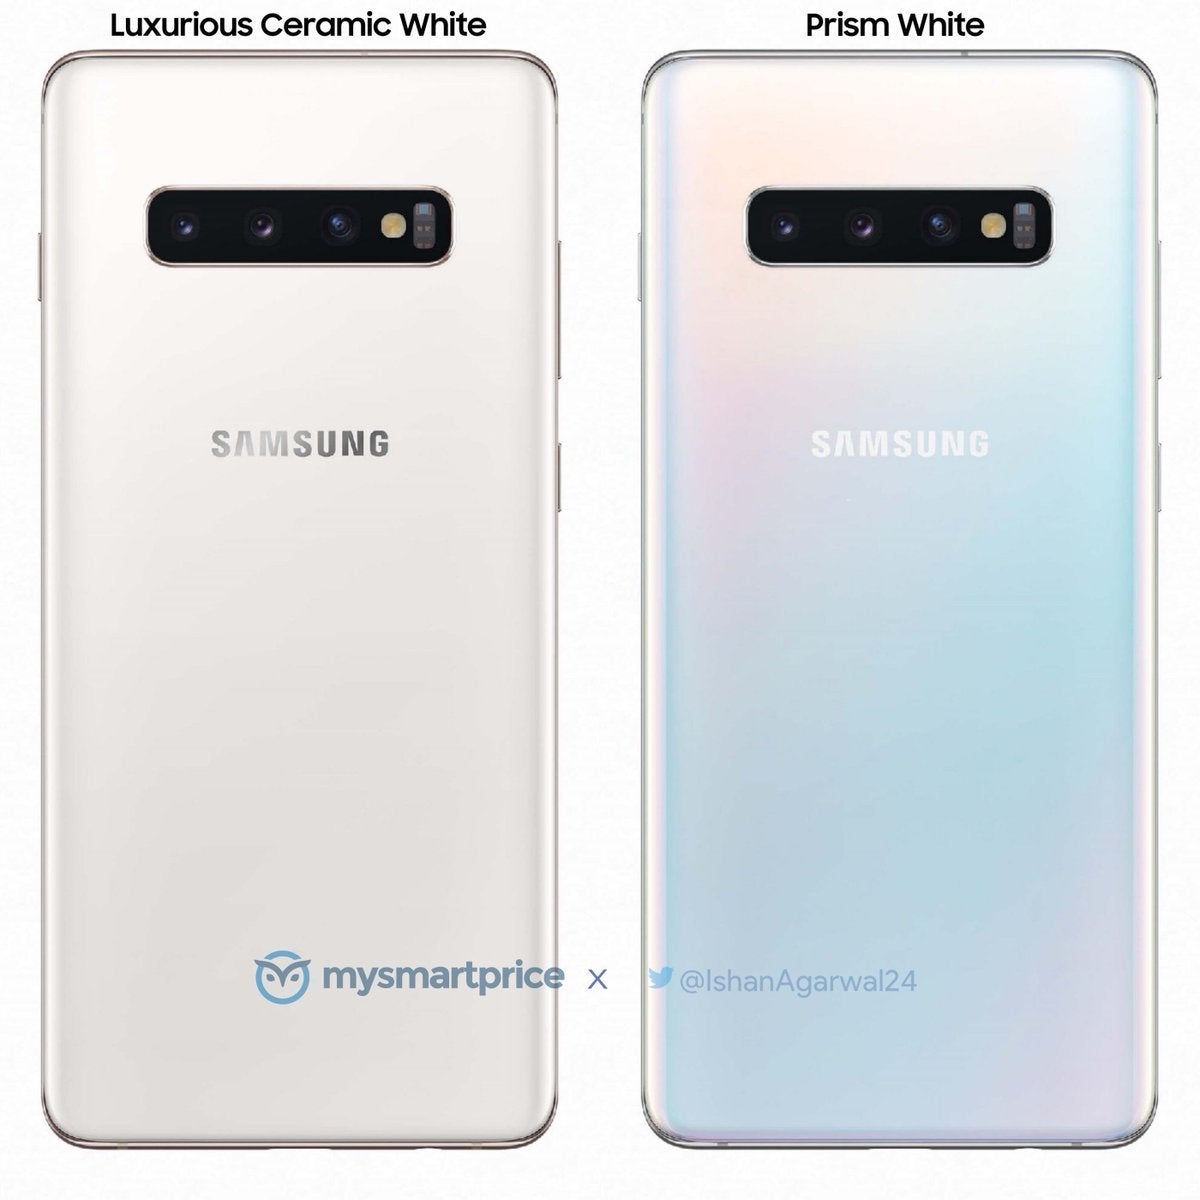 Galaxy S10+ in Ceramic White - Galaxy S10, S10+ and S10e release date, price, news and leaks